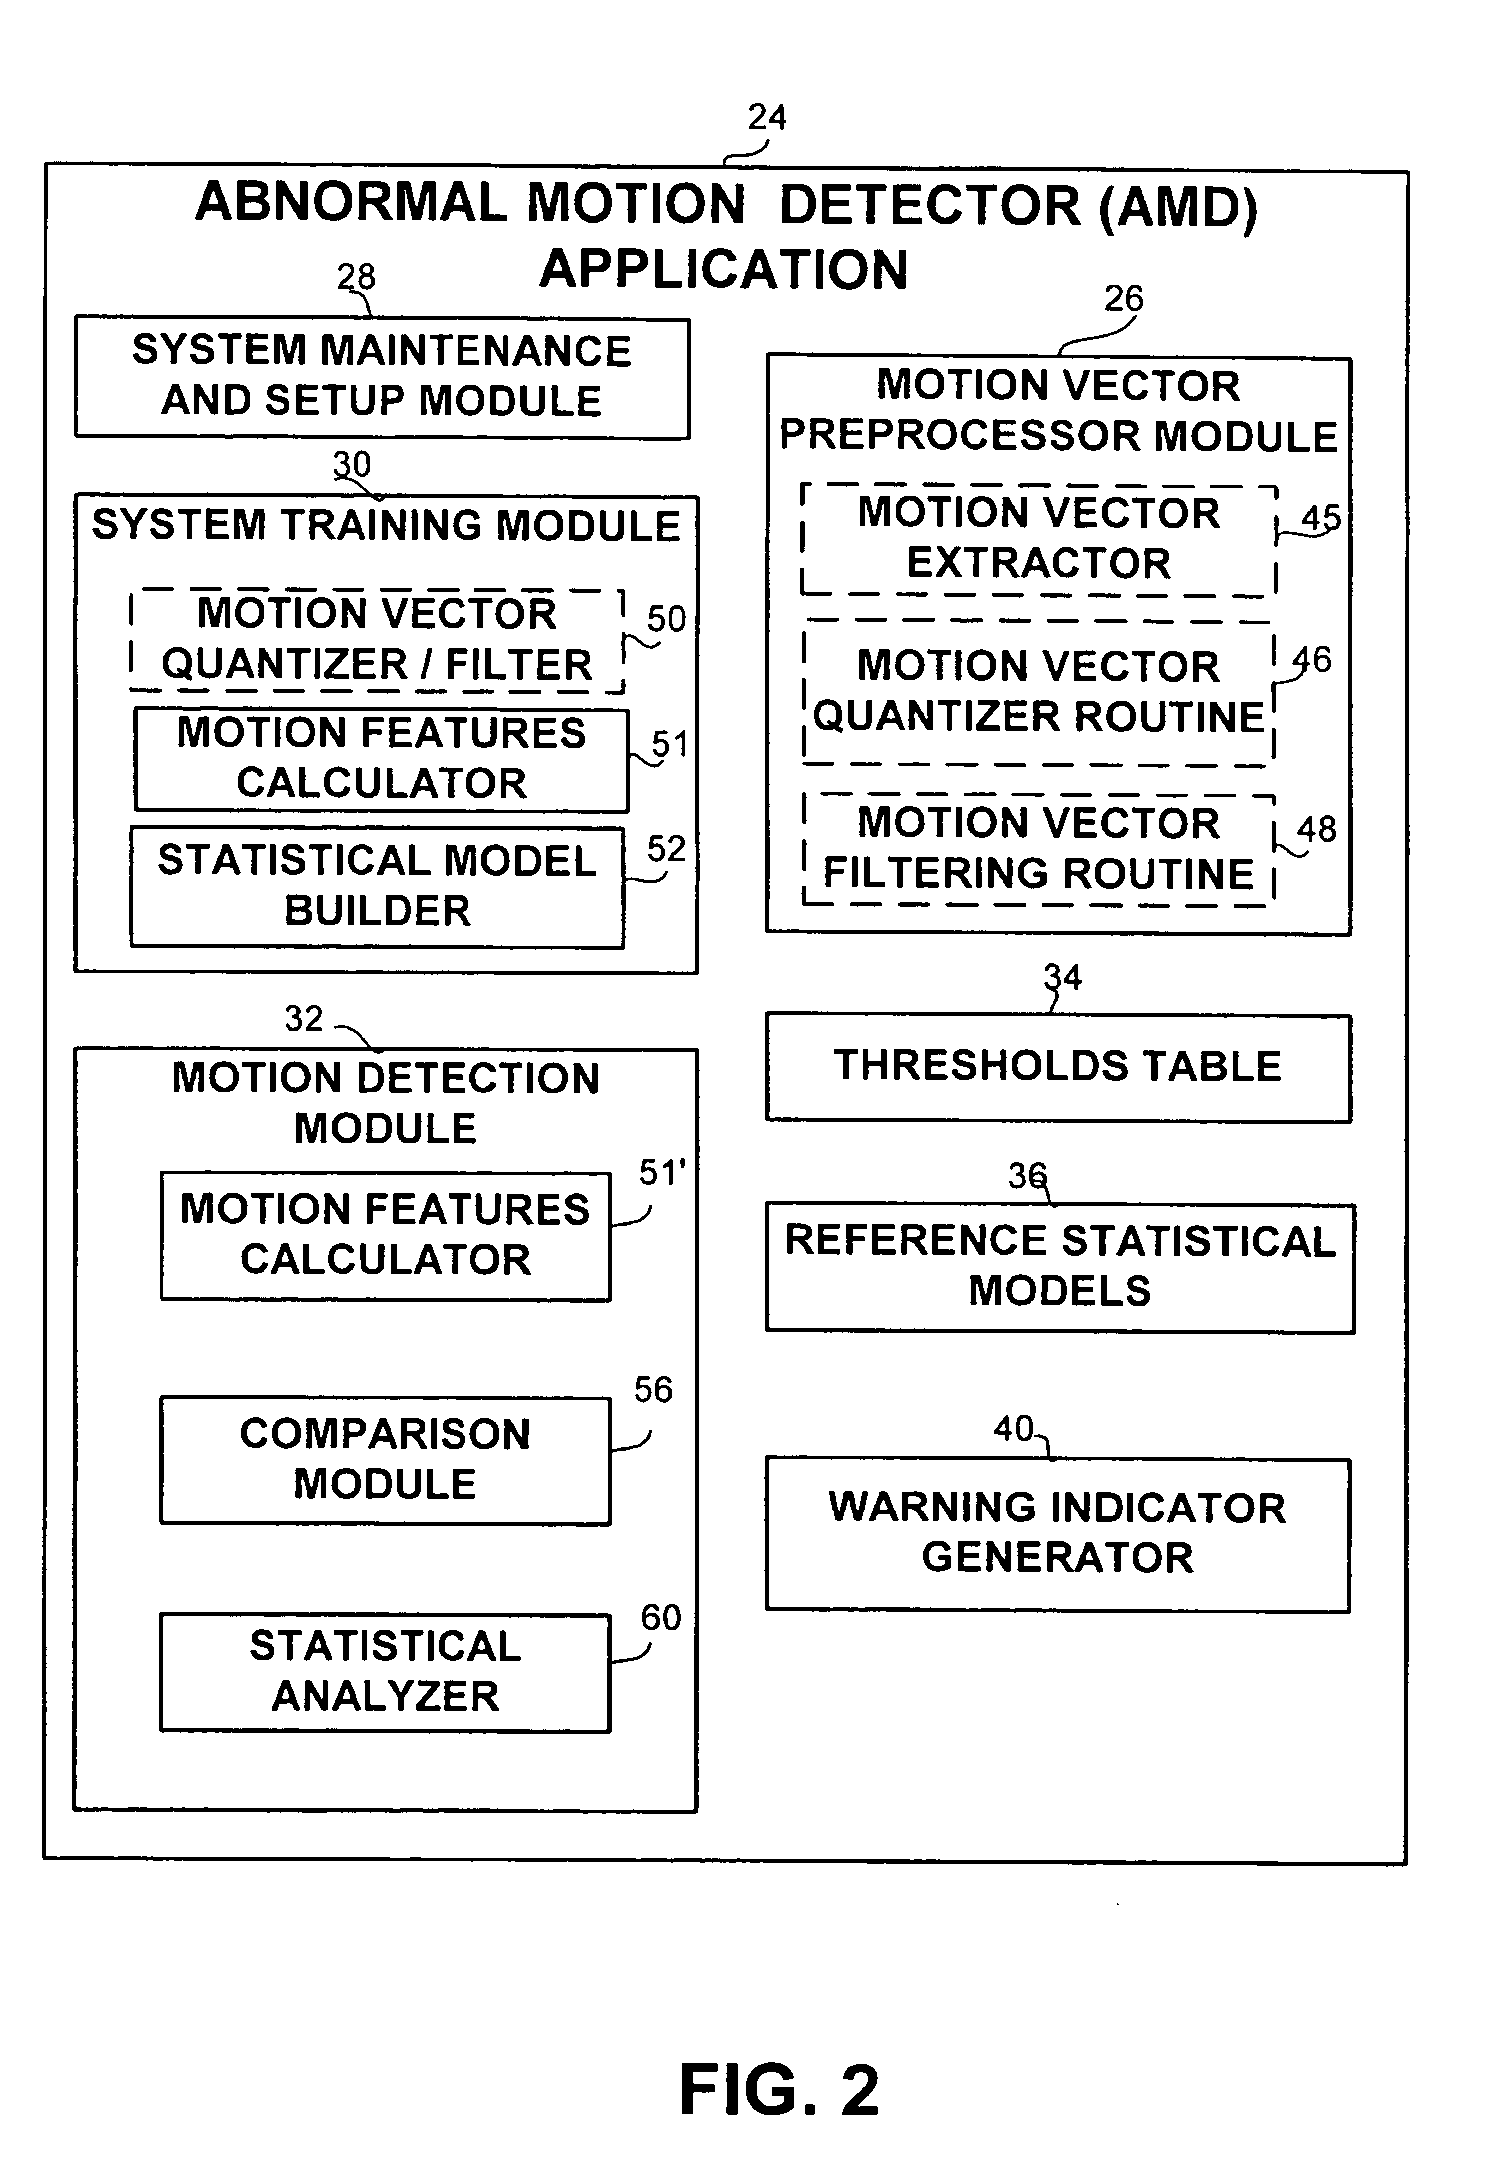 Apparatus and methods for the detection of abnormal motion in a video stream